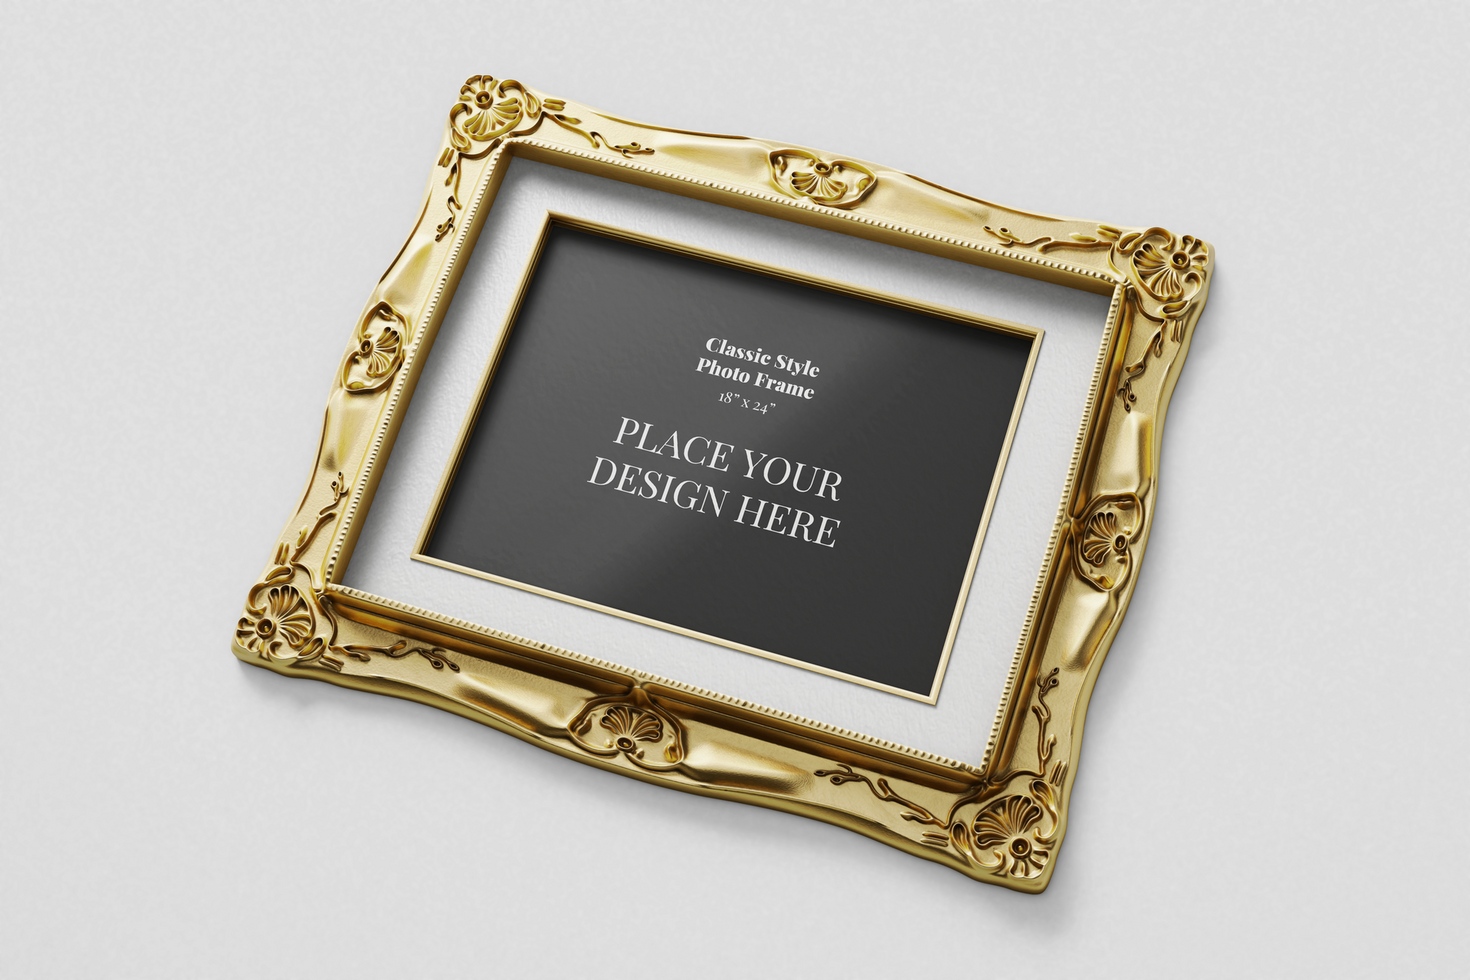 classic luxury ornament style shiny gold picture horizontal frame 18x24 inch realistic mockup 3d rendering illustration psd